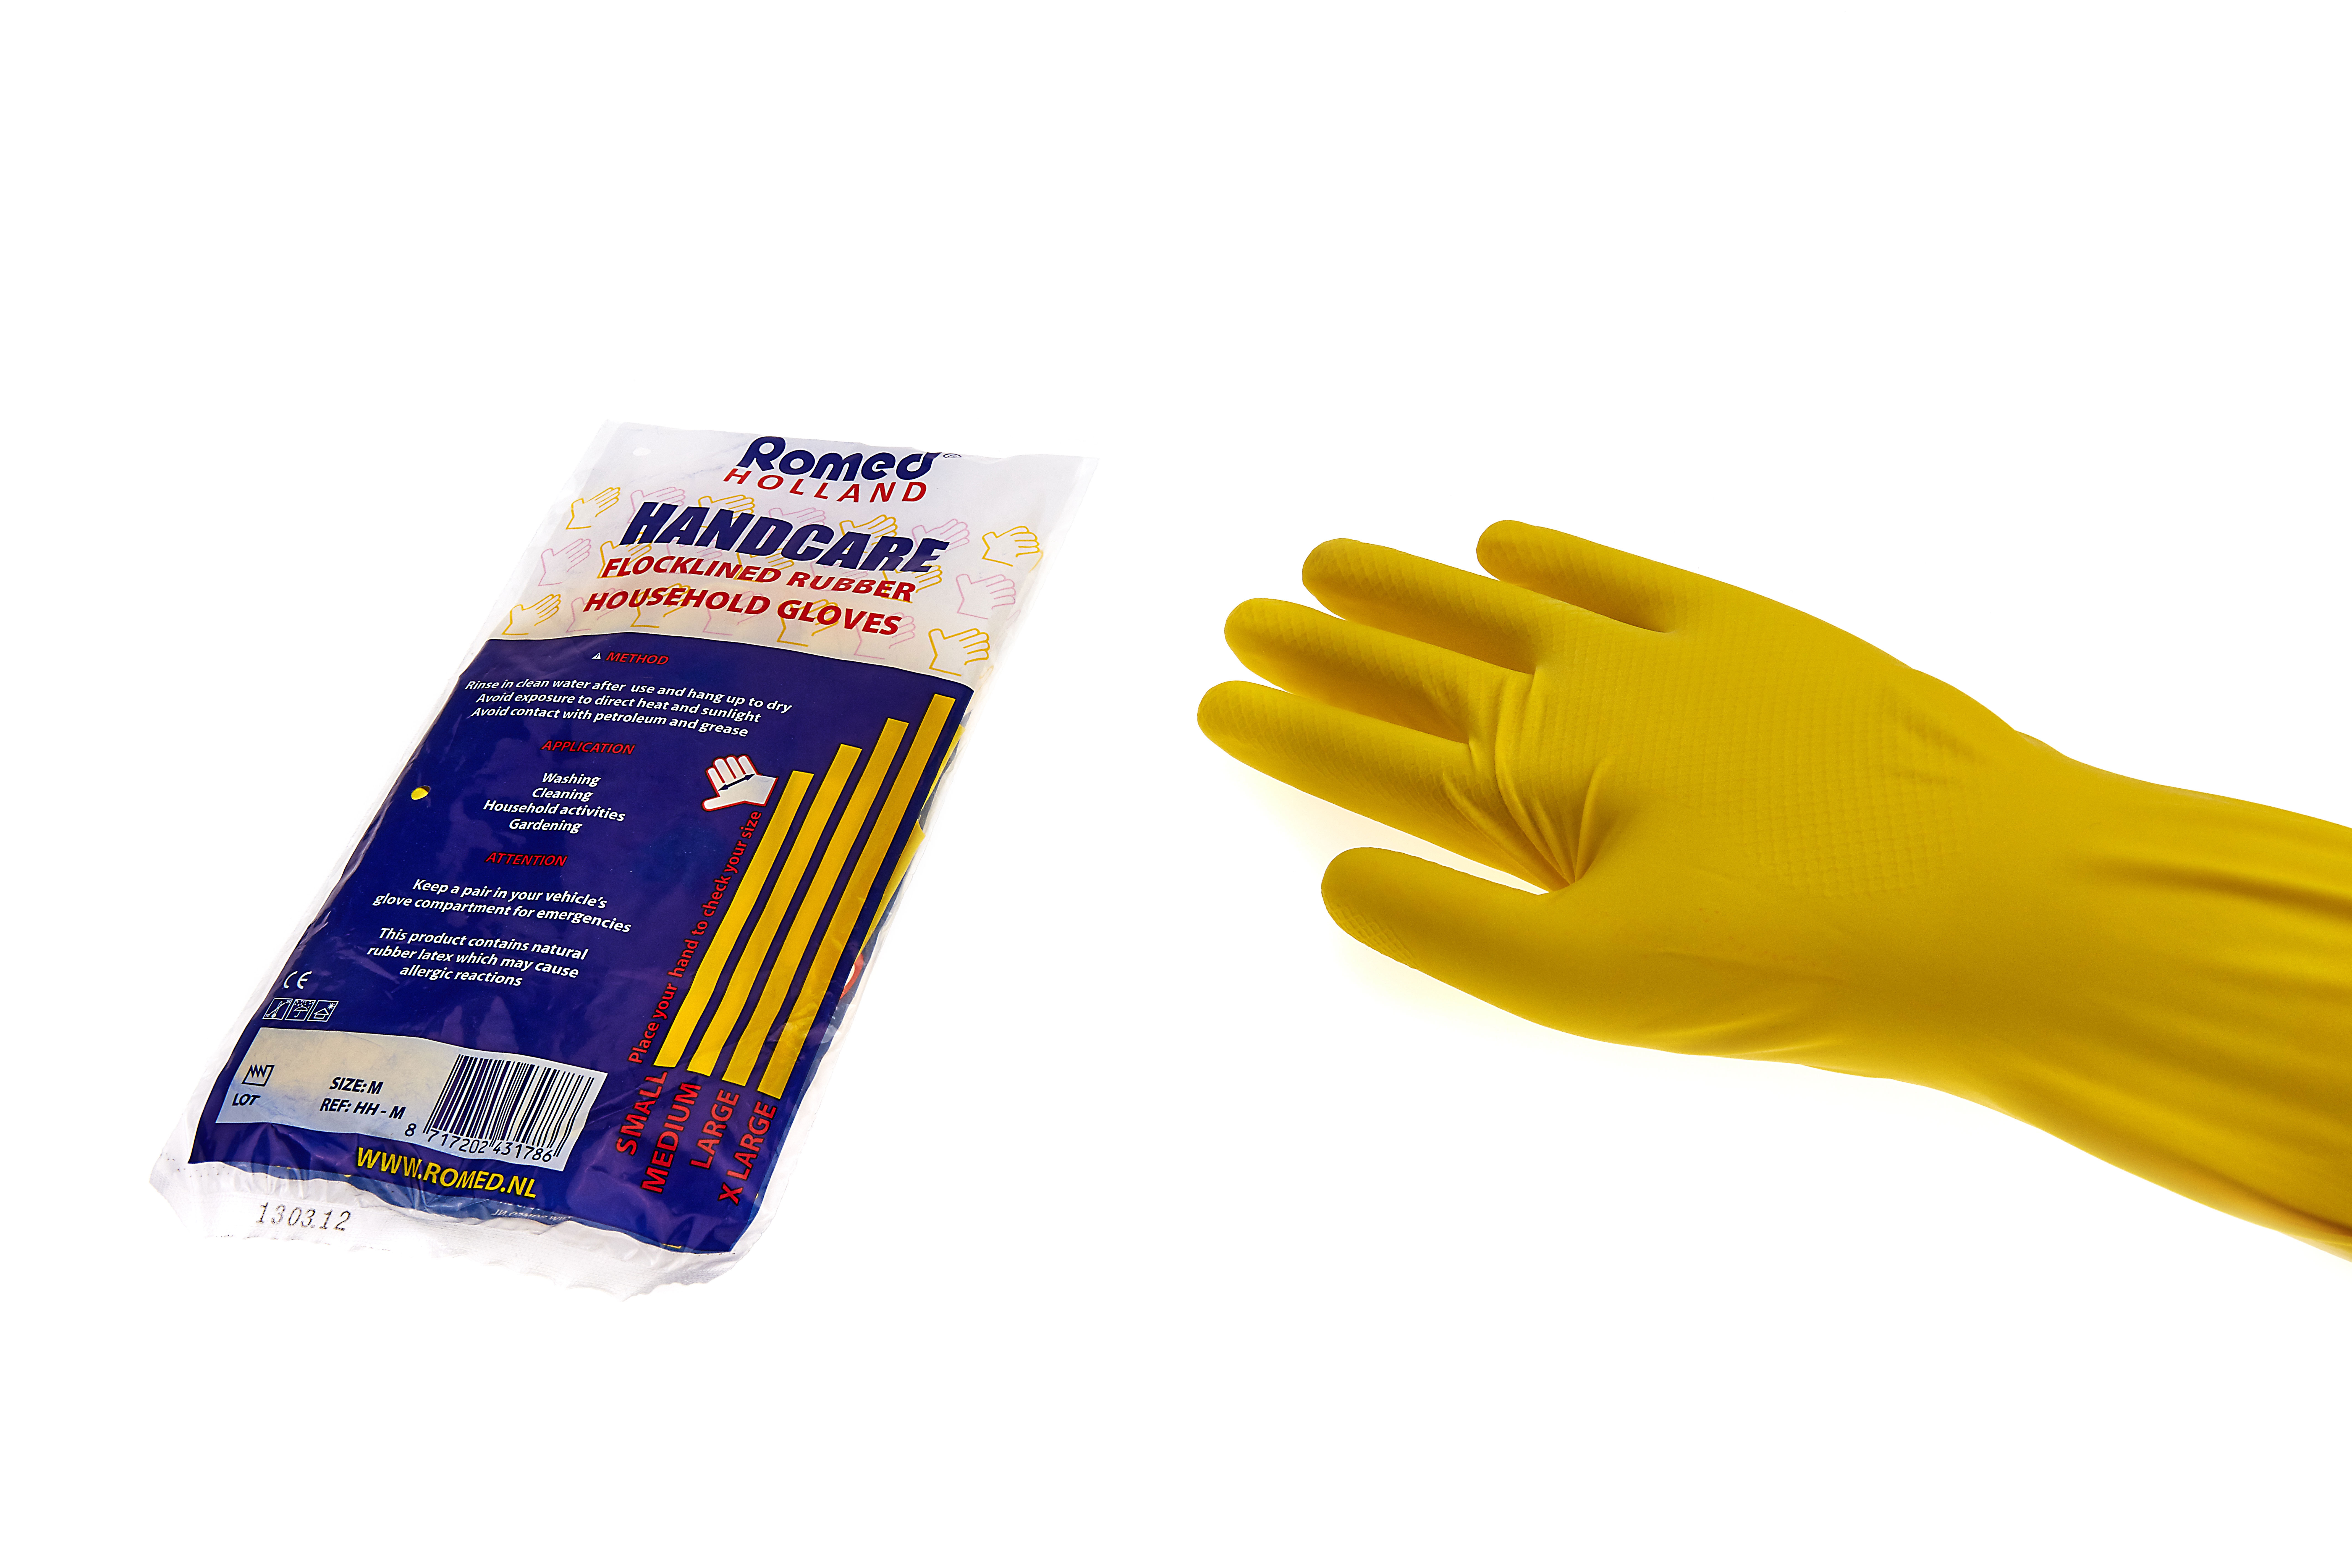 HH-S Romed household gloves, small, per pair in a polybag, 12 polybags in a master polybag, 12 x 12 pairs = 144 pairs in a carton.